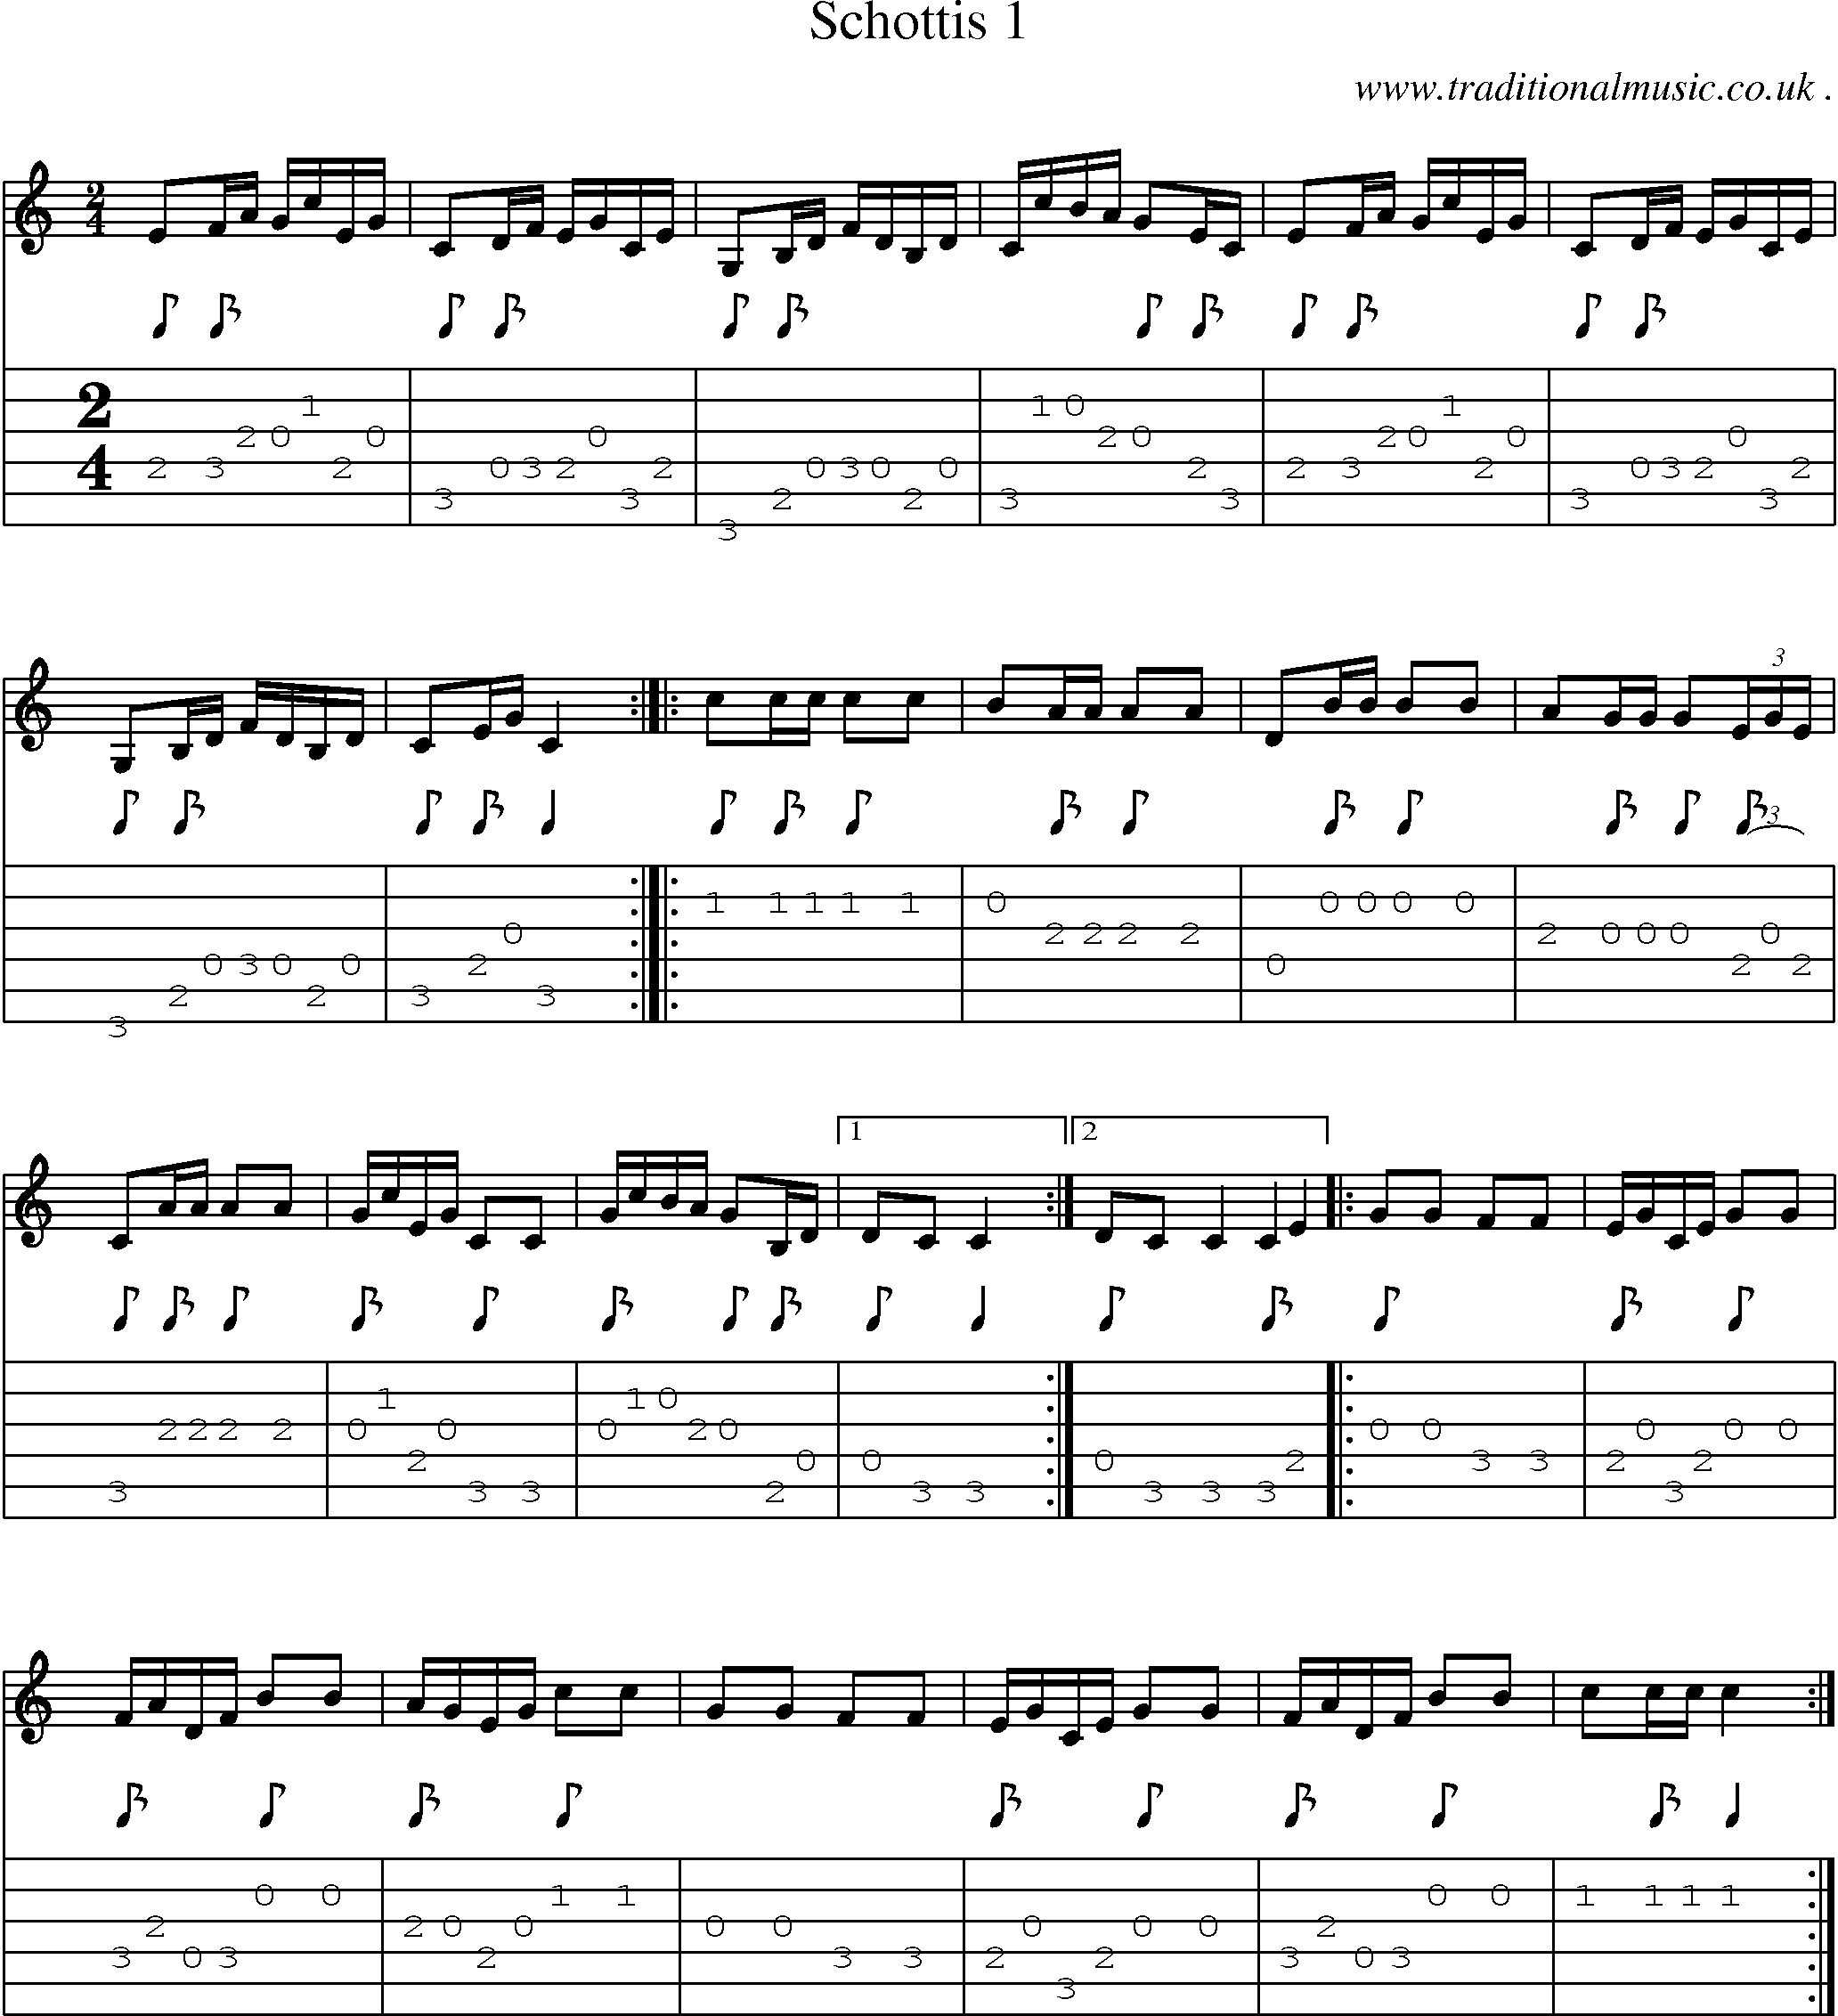 Sheet-Music and Guitar Tabs for Schottis 1